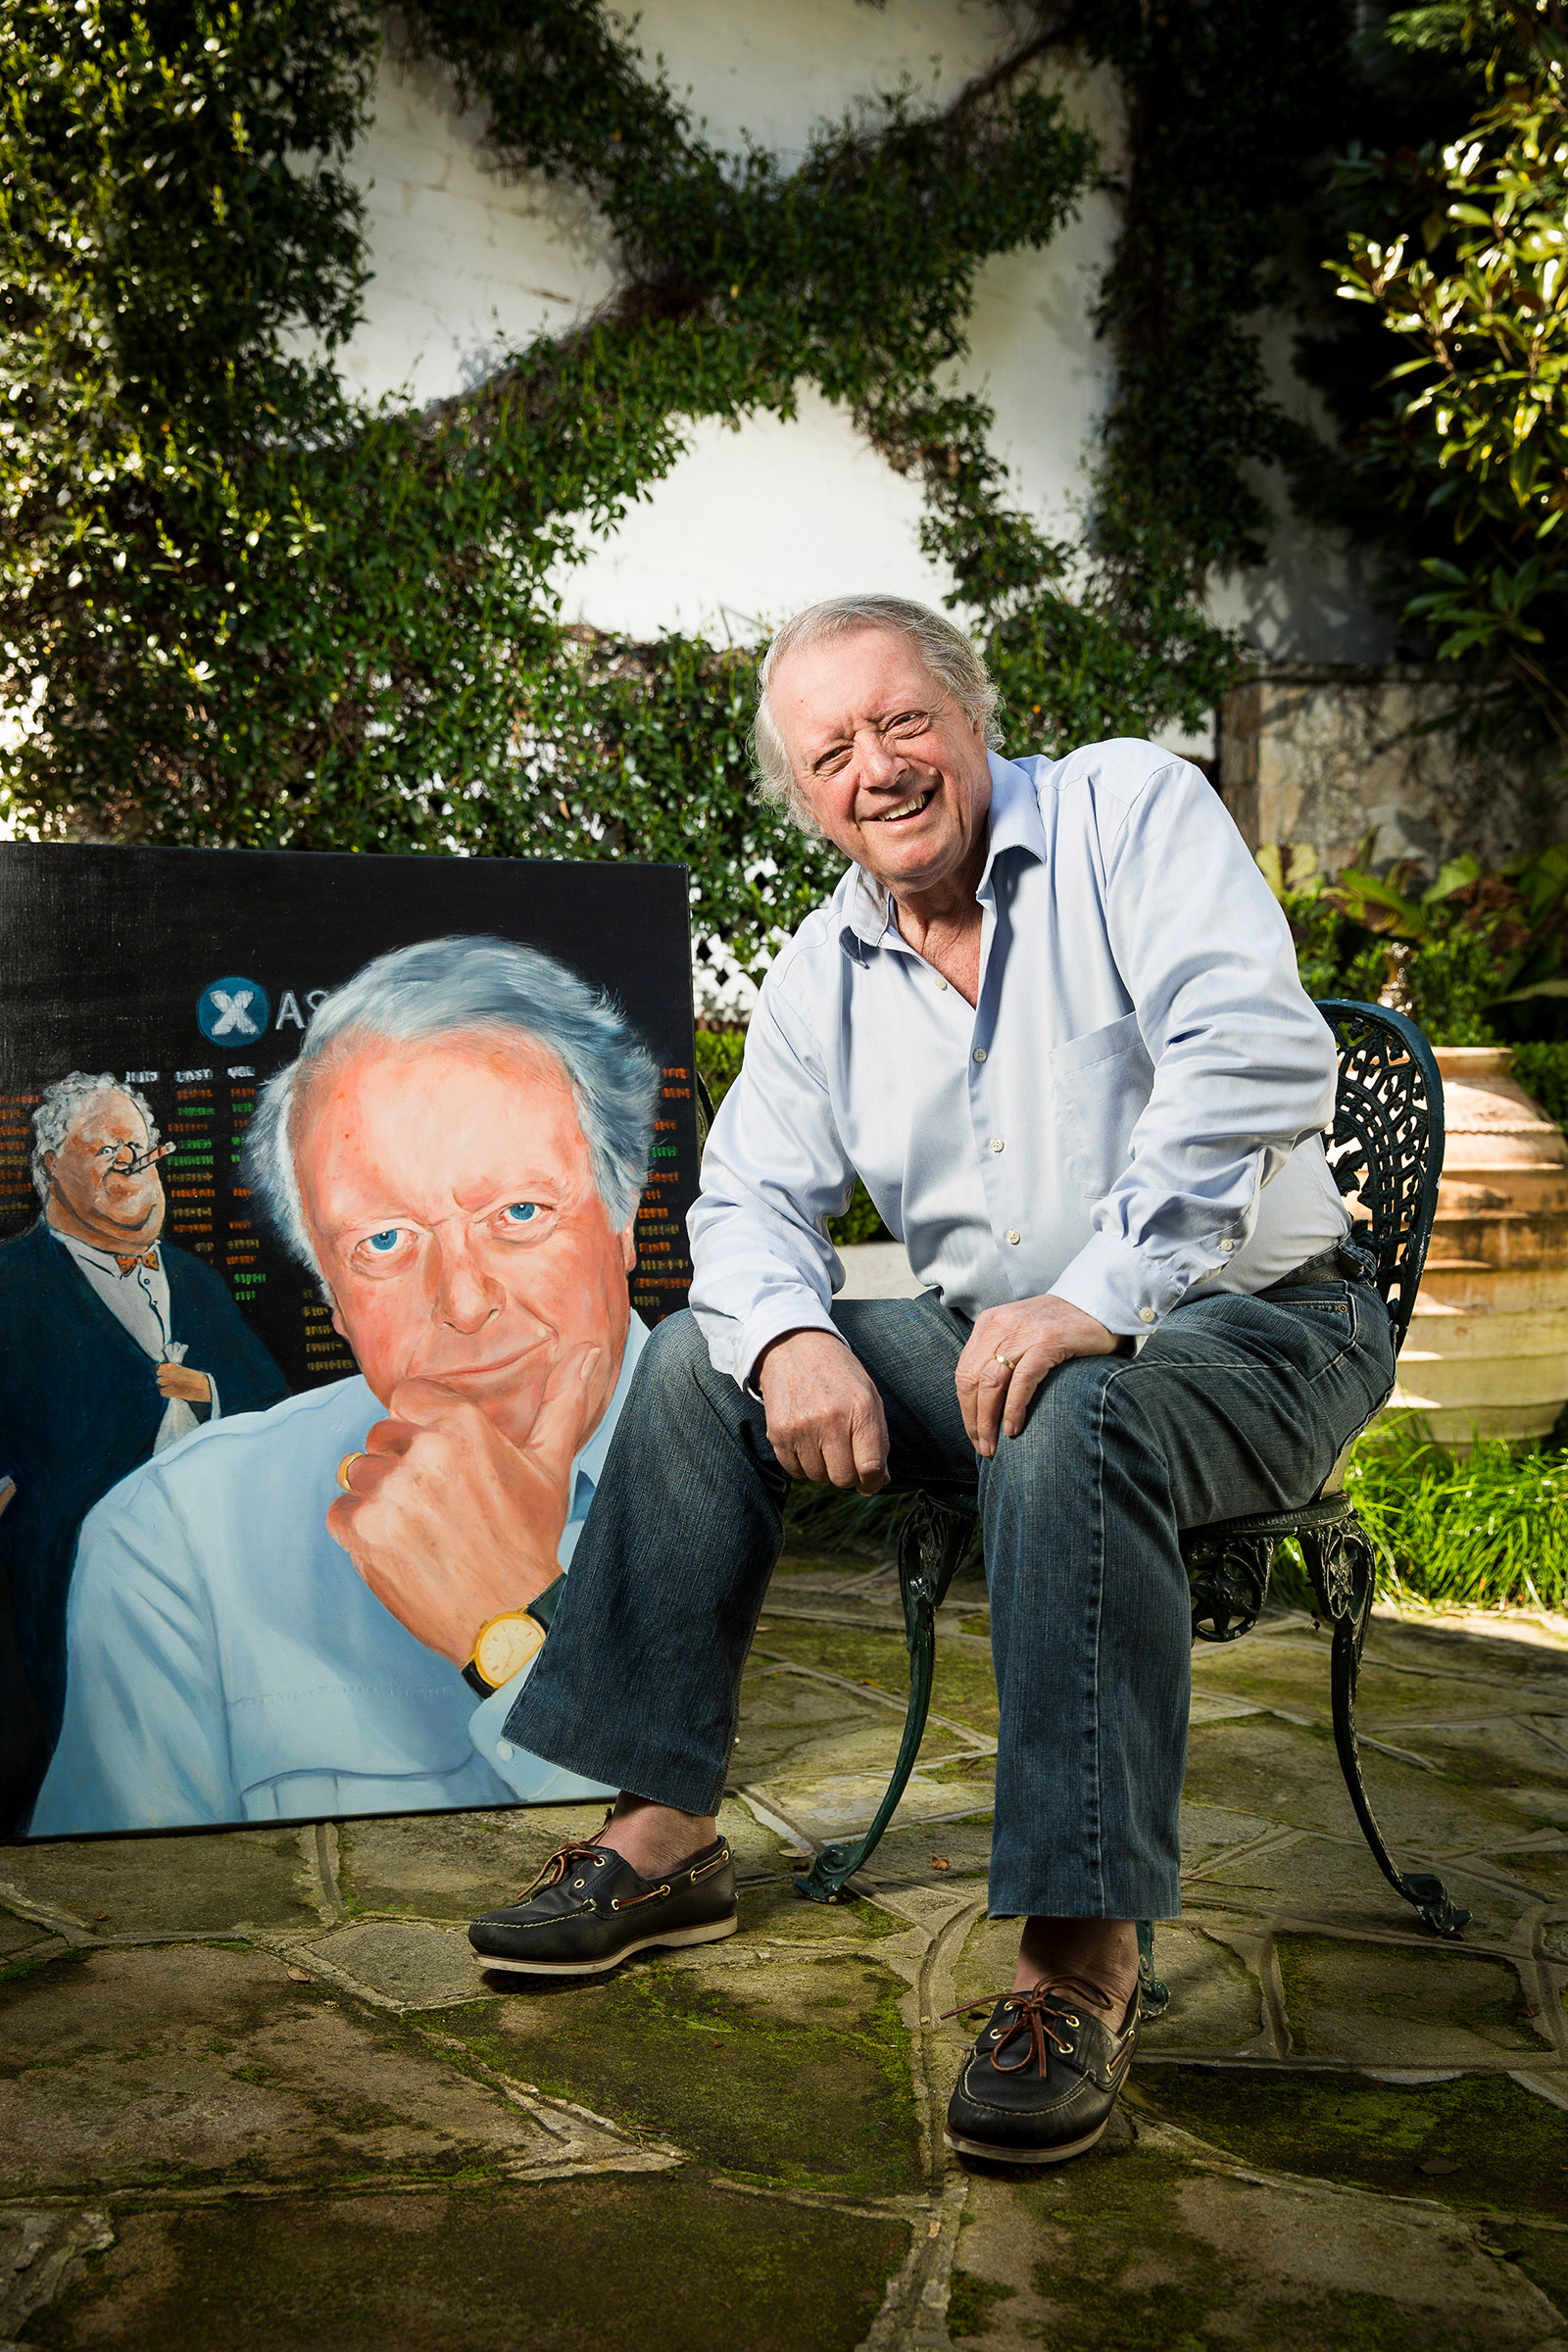 Editorial photography Trevor Sykes Australian finance journalist seated in garden with a painted self portrait in background